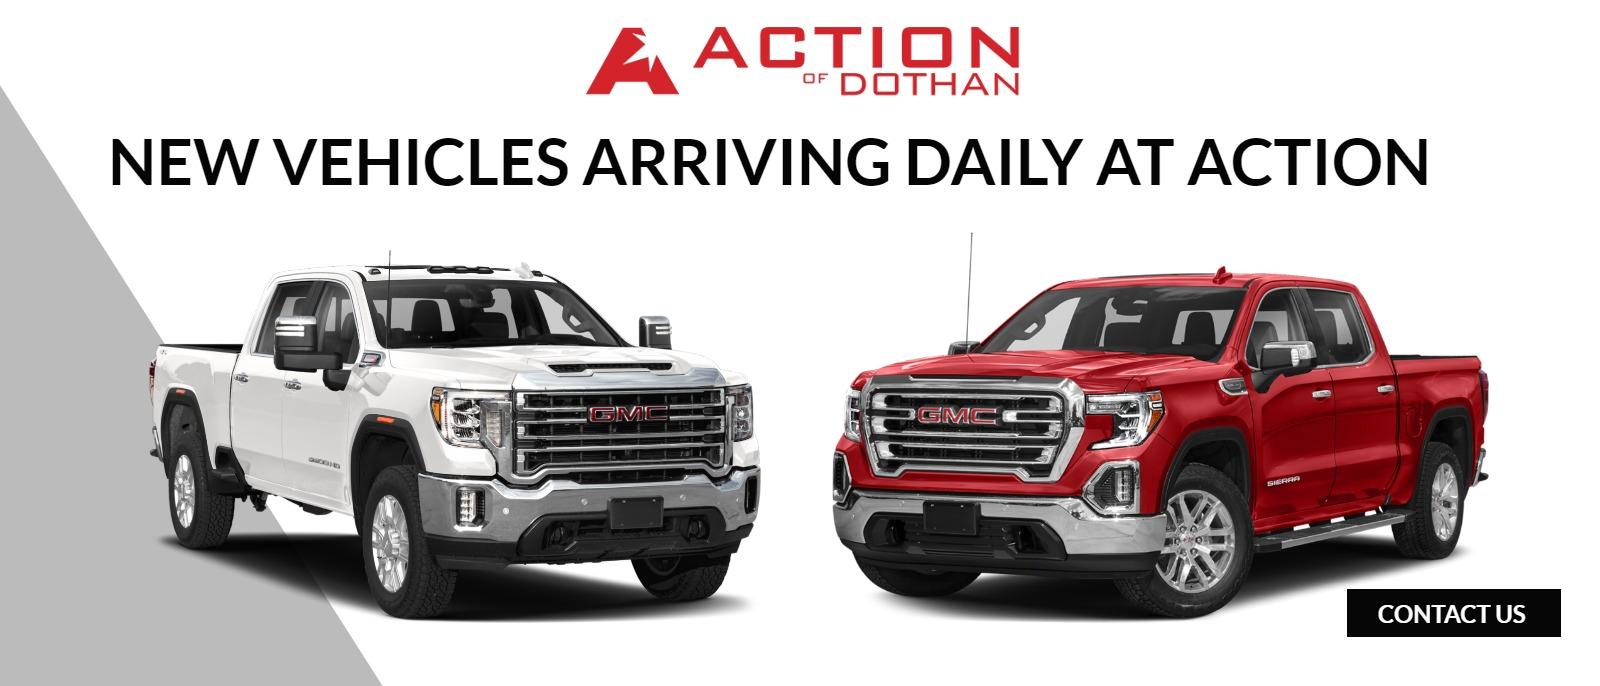 New Vehicles Arriving Daily at Action